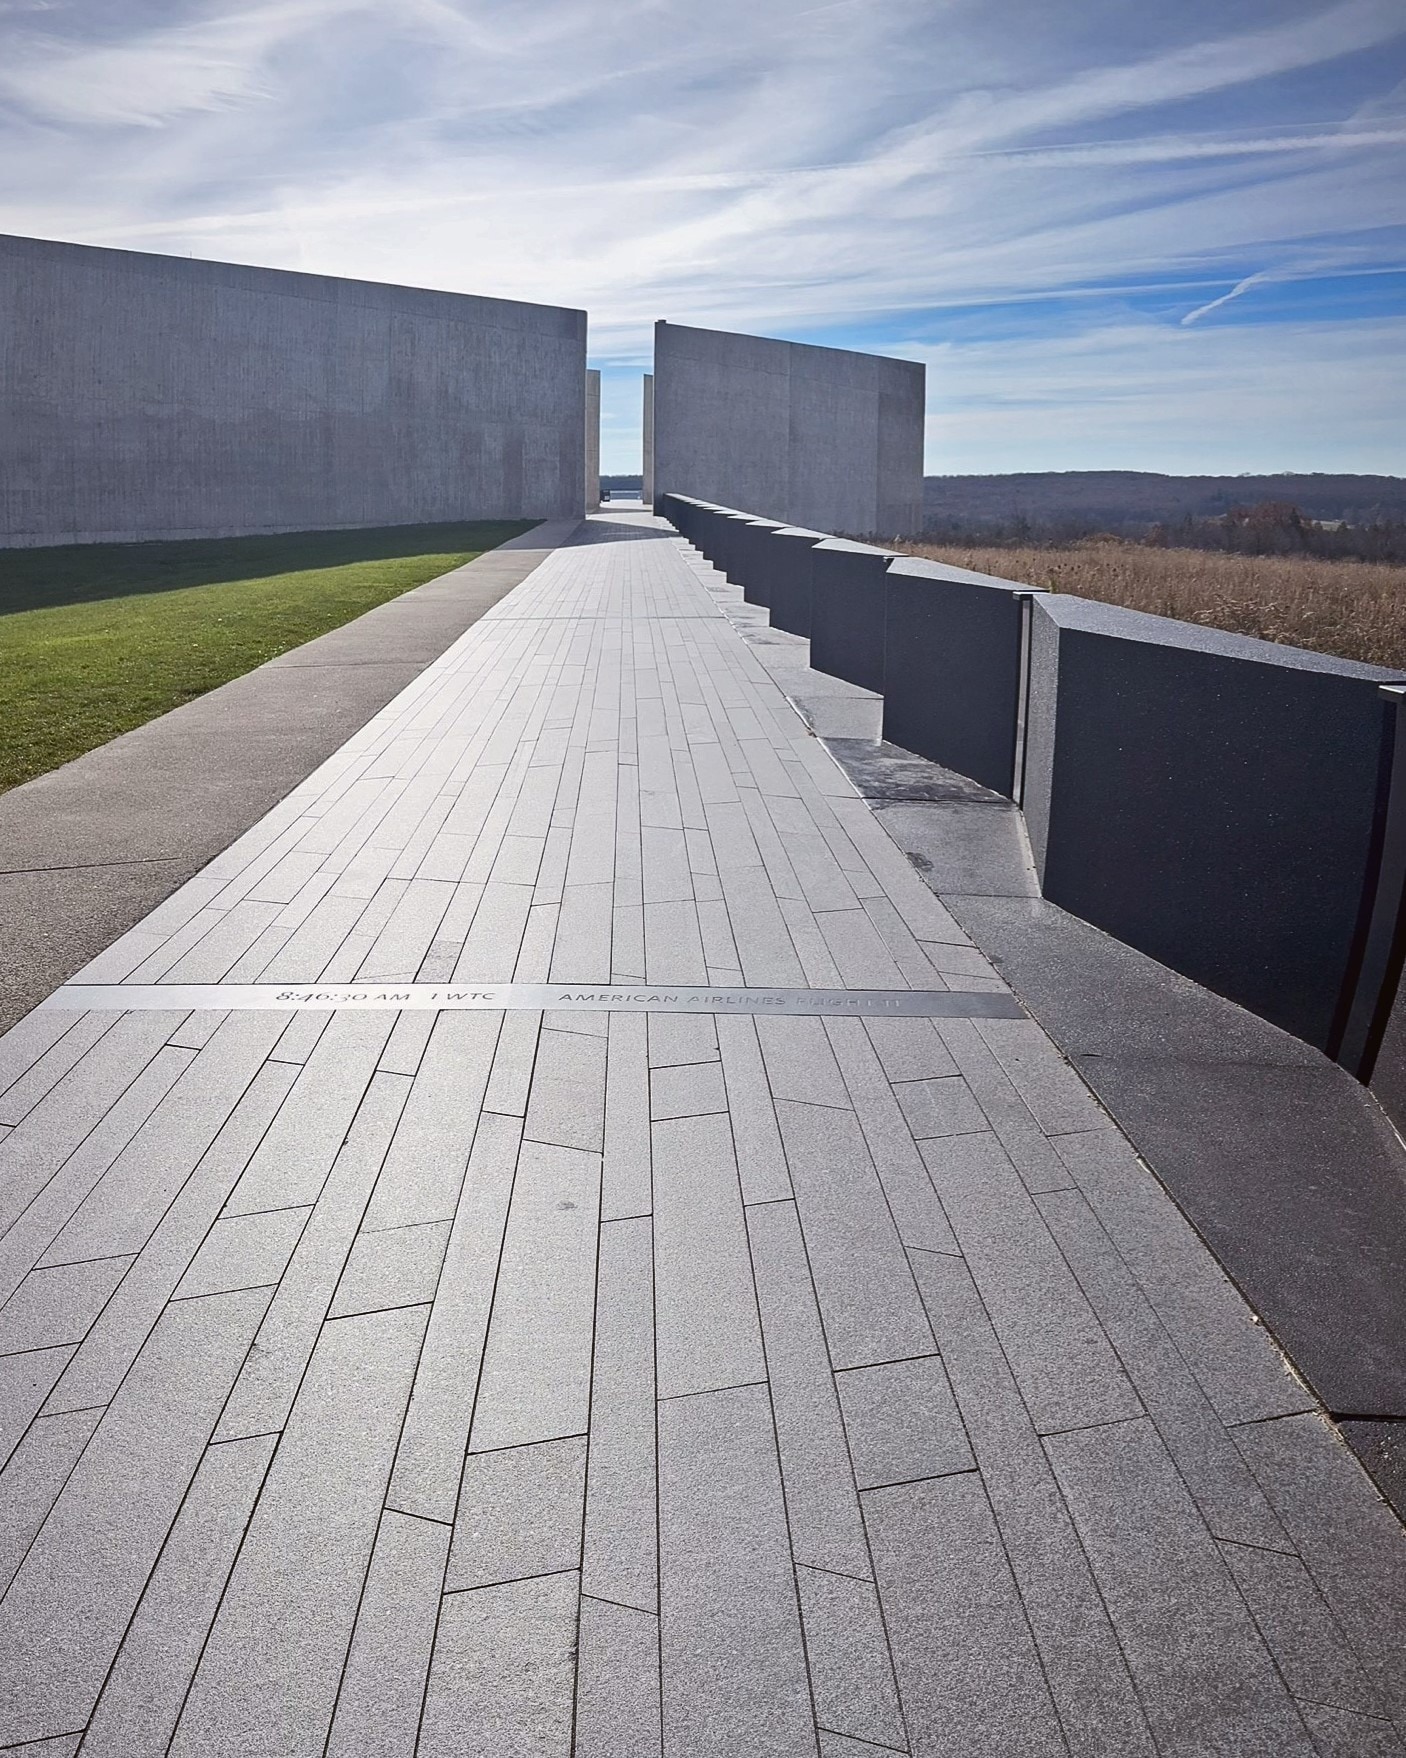 A black granite walkway, situated at the Visitor Center of the Flight 93 Memorial , guides visitors through the Portal Walls, tracing a solemn journey along the Flight 93 flight path. The glow of the bright sun in the top left illuminates the path, symbolizing hope and resilience.